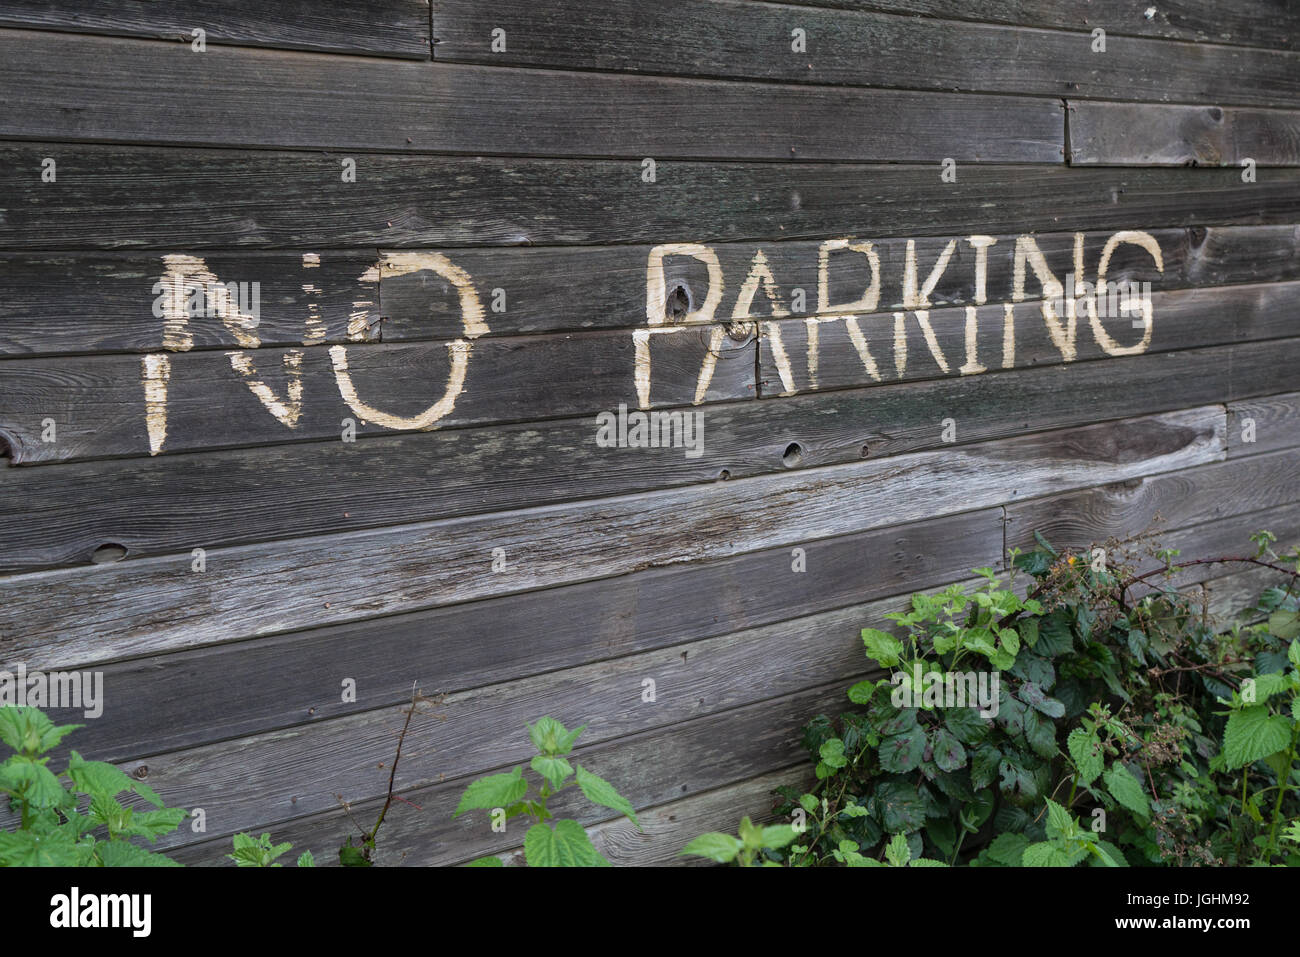 No parking sign on old wooden building Stock Photo